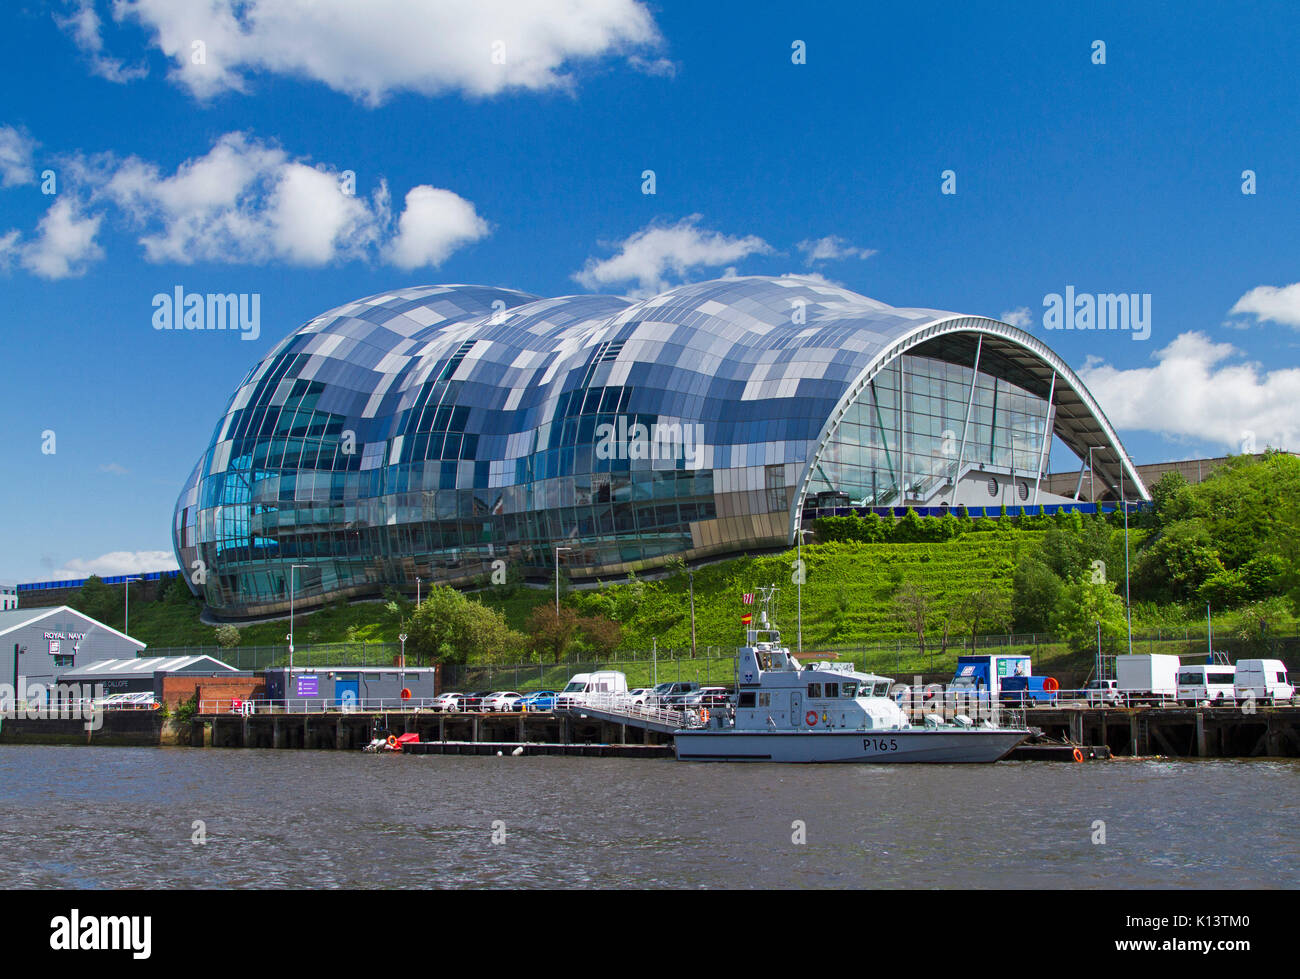 Sage Gateshead entertainment centre, imposing glass building of modern architecture beside Tyne river at Newcastle-upon-Tyne, England under blue sky Stock Photo